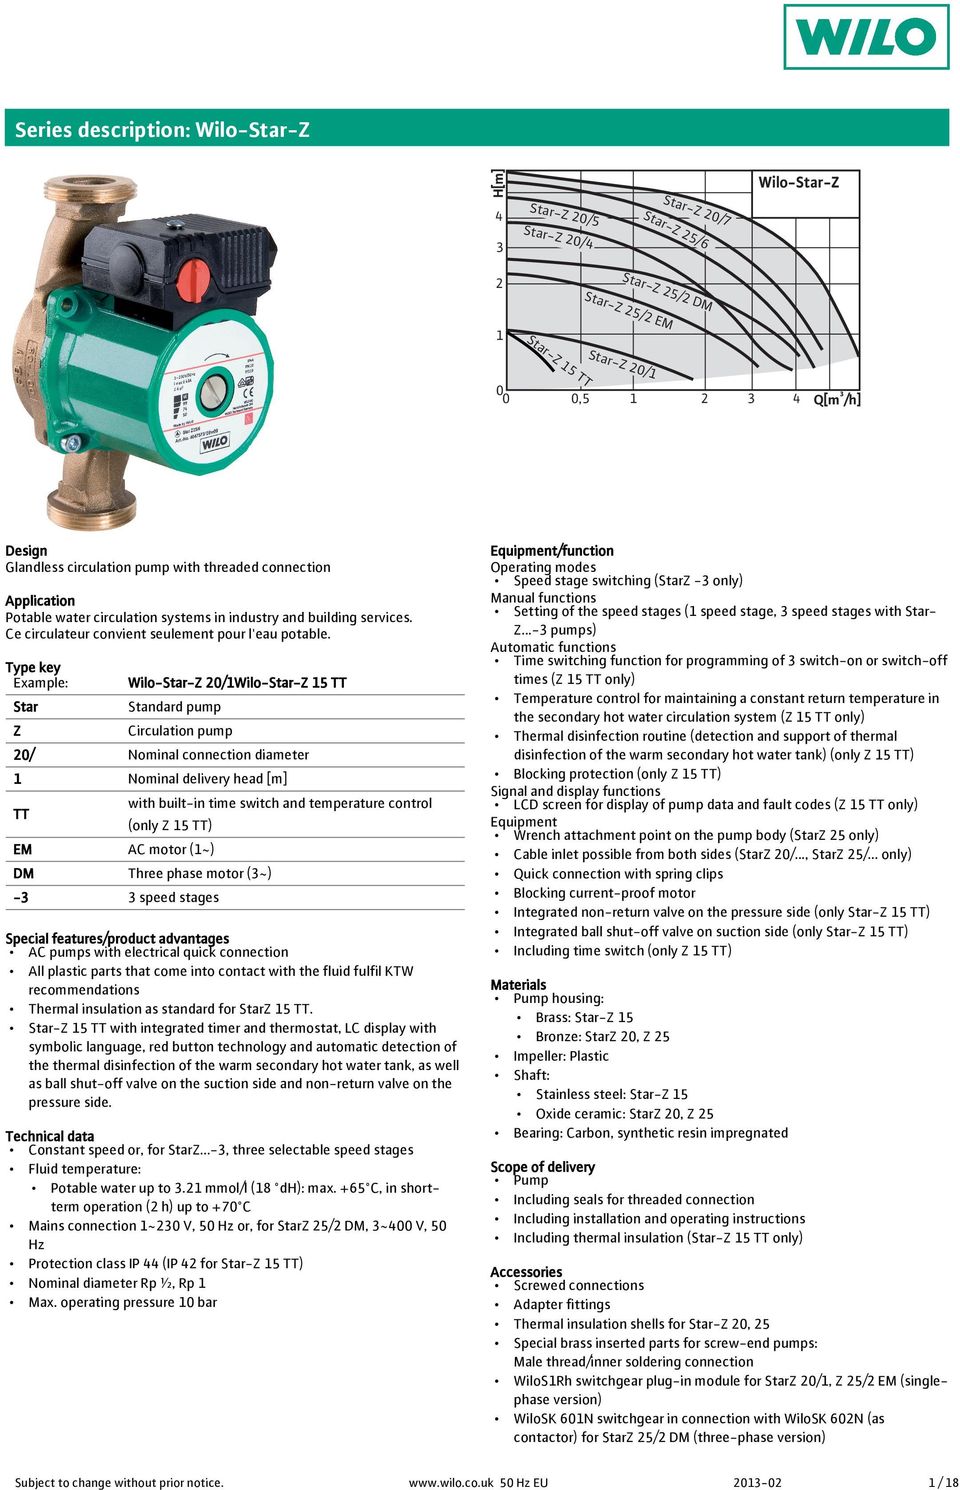 Type key Example: Wilo-Star-Z 2/1Wilo-Star-Z 15 TT Star Standard pump Z Circulation pump 2/ Nominal connection diameter 1 Nominal delivery head [m] TT with built-in time switch and temperature